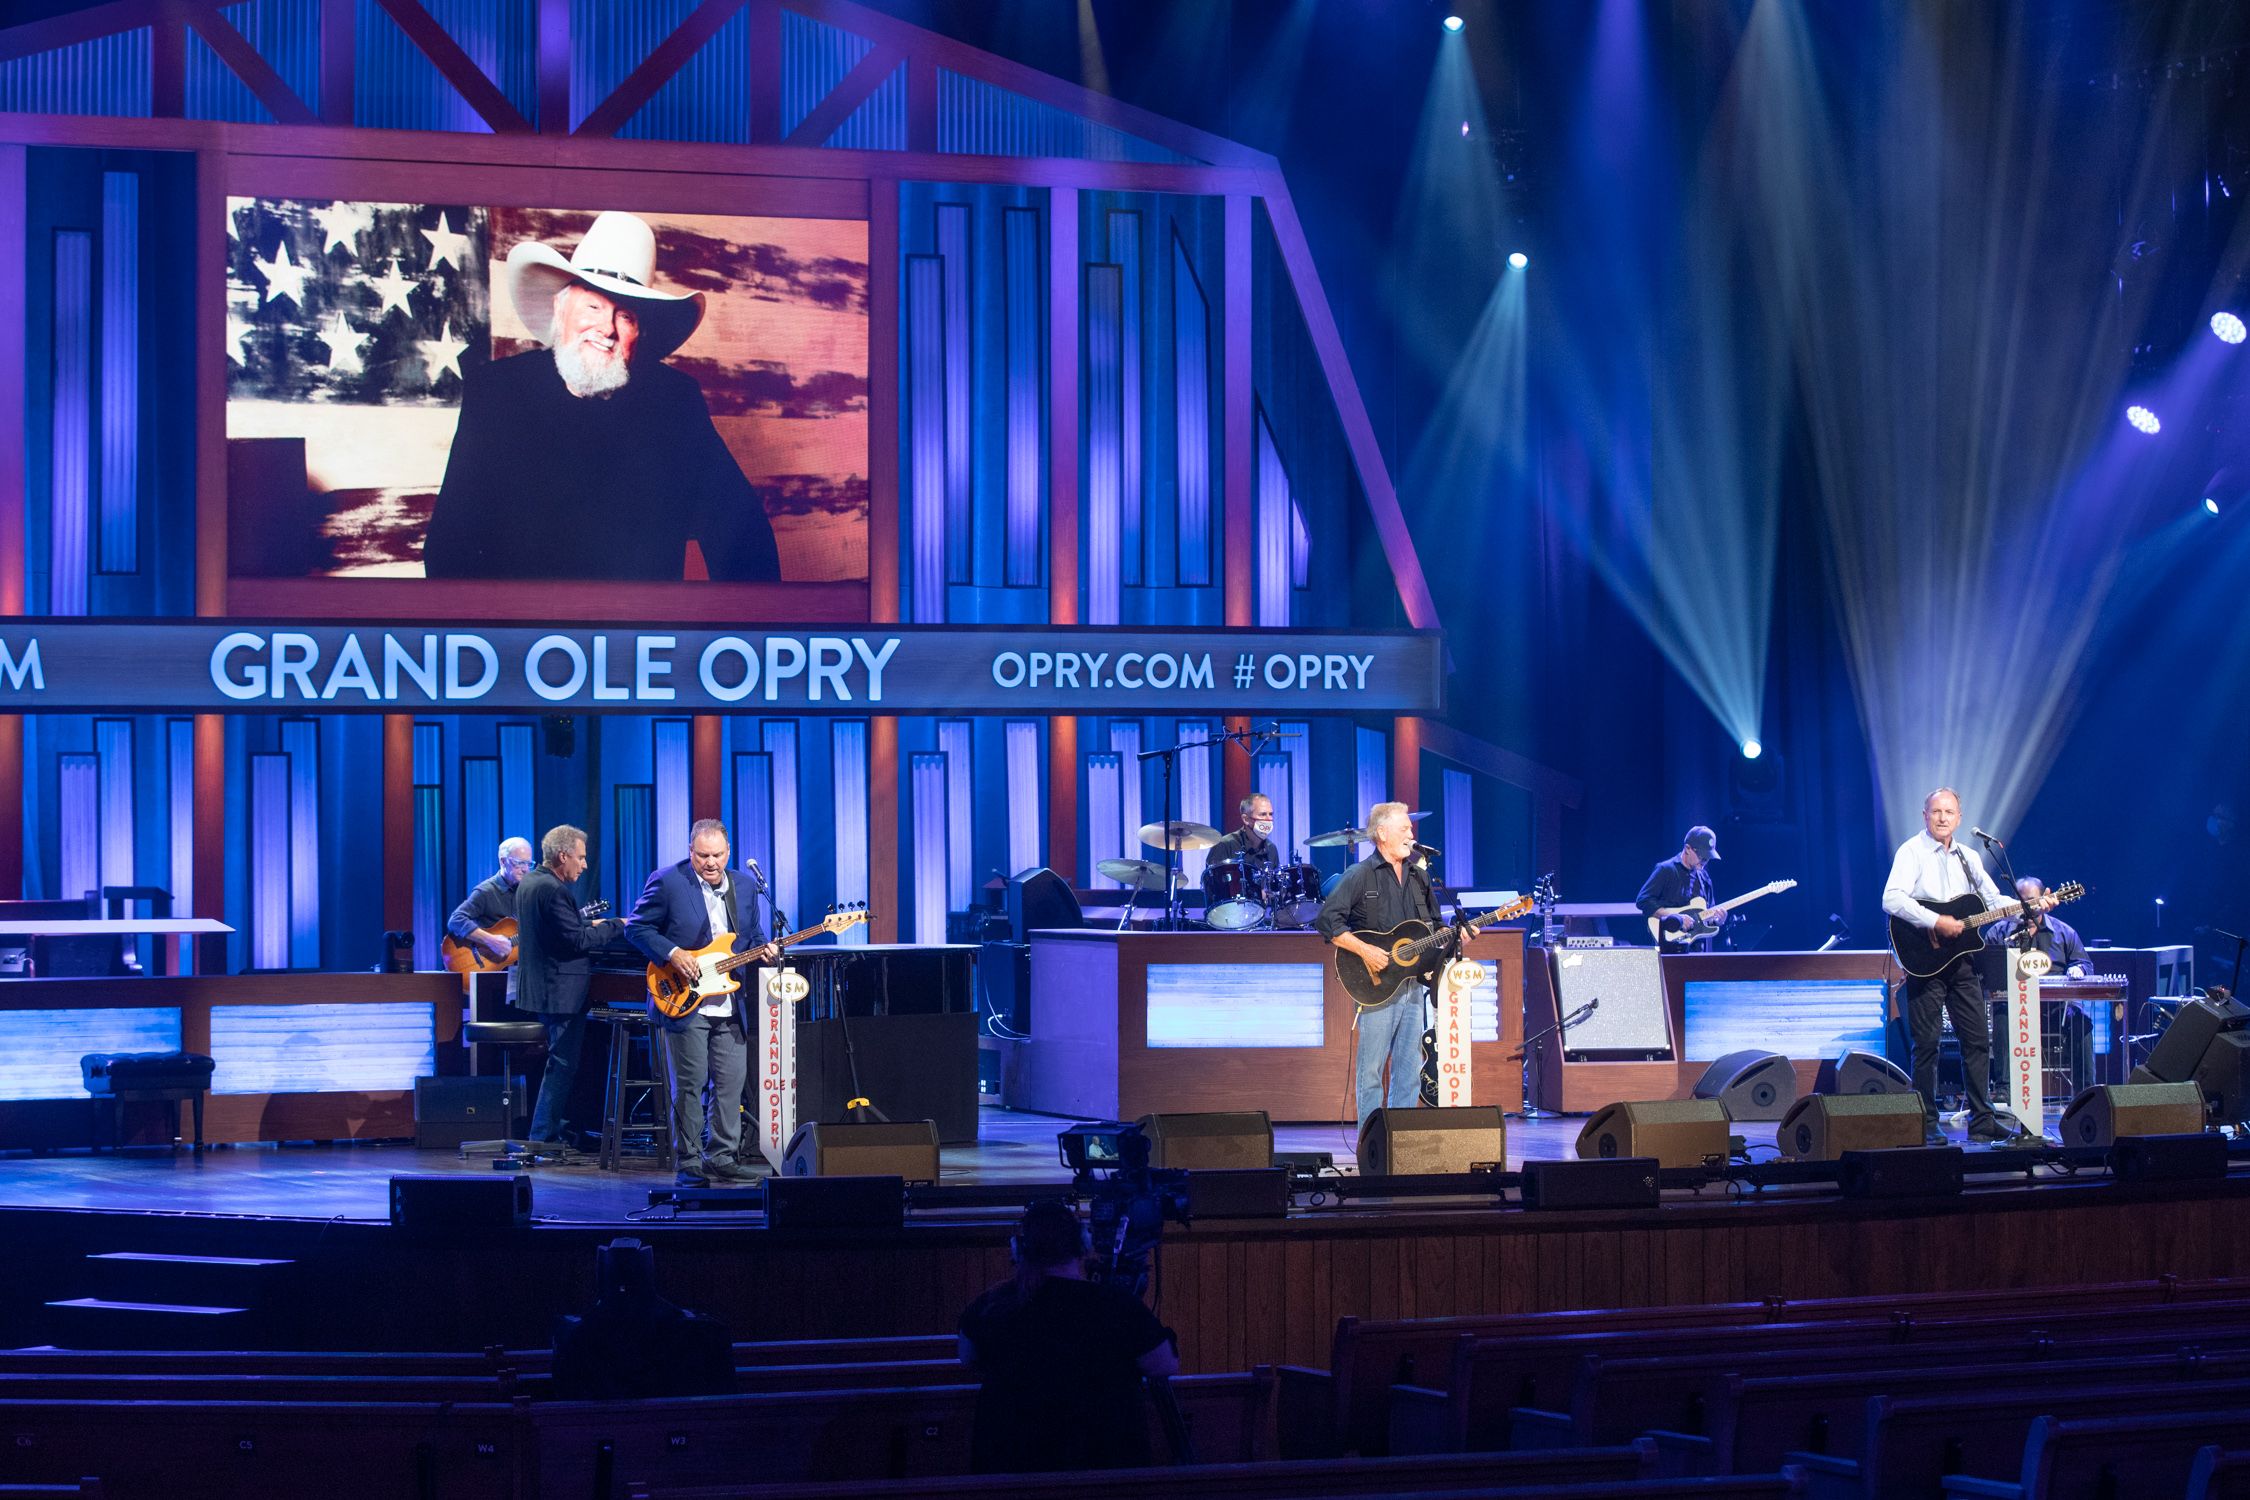 Grand Ole Opry Honors Opry Member Charlie Daniels  on Saturday Night’s Show